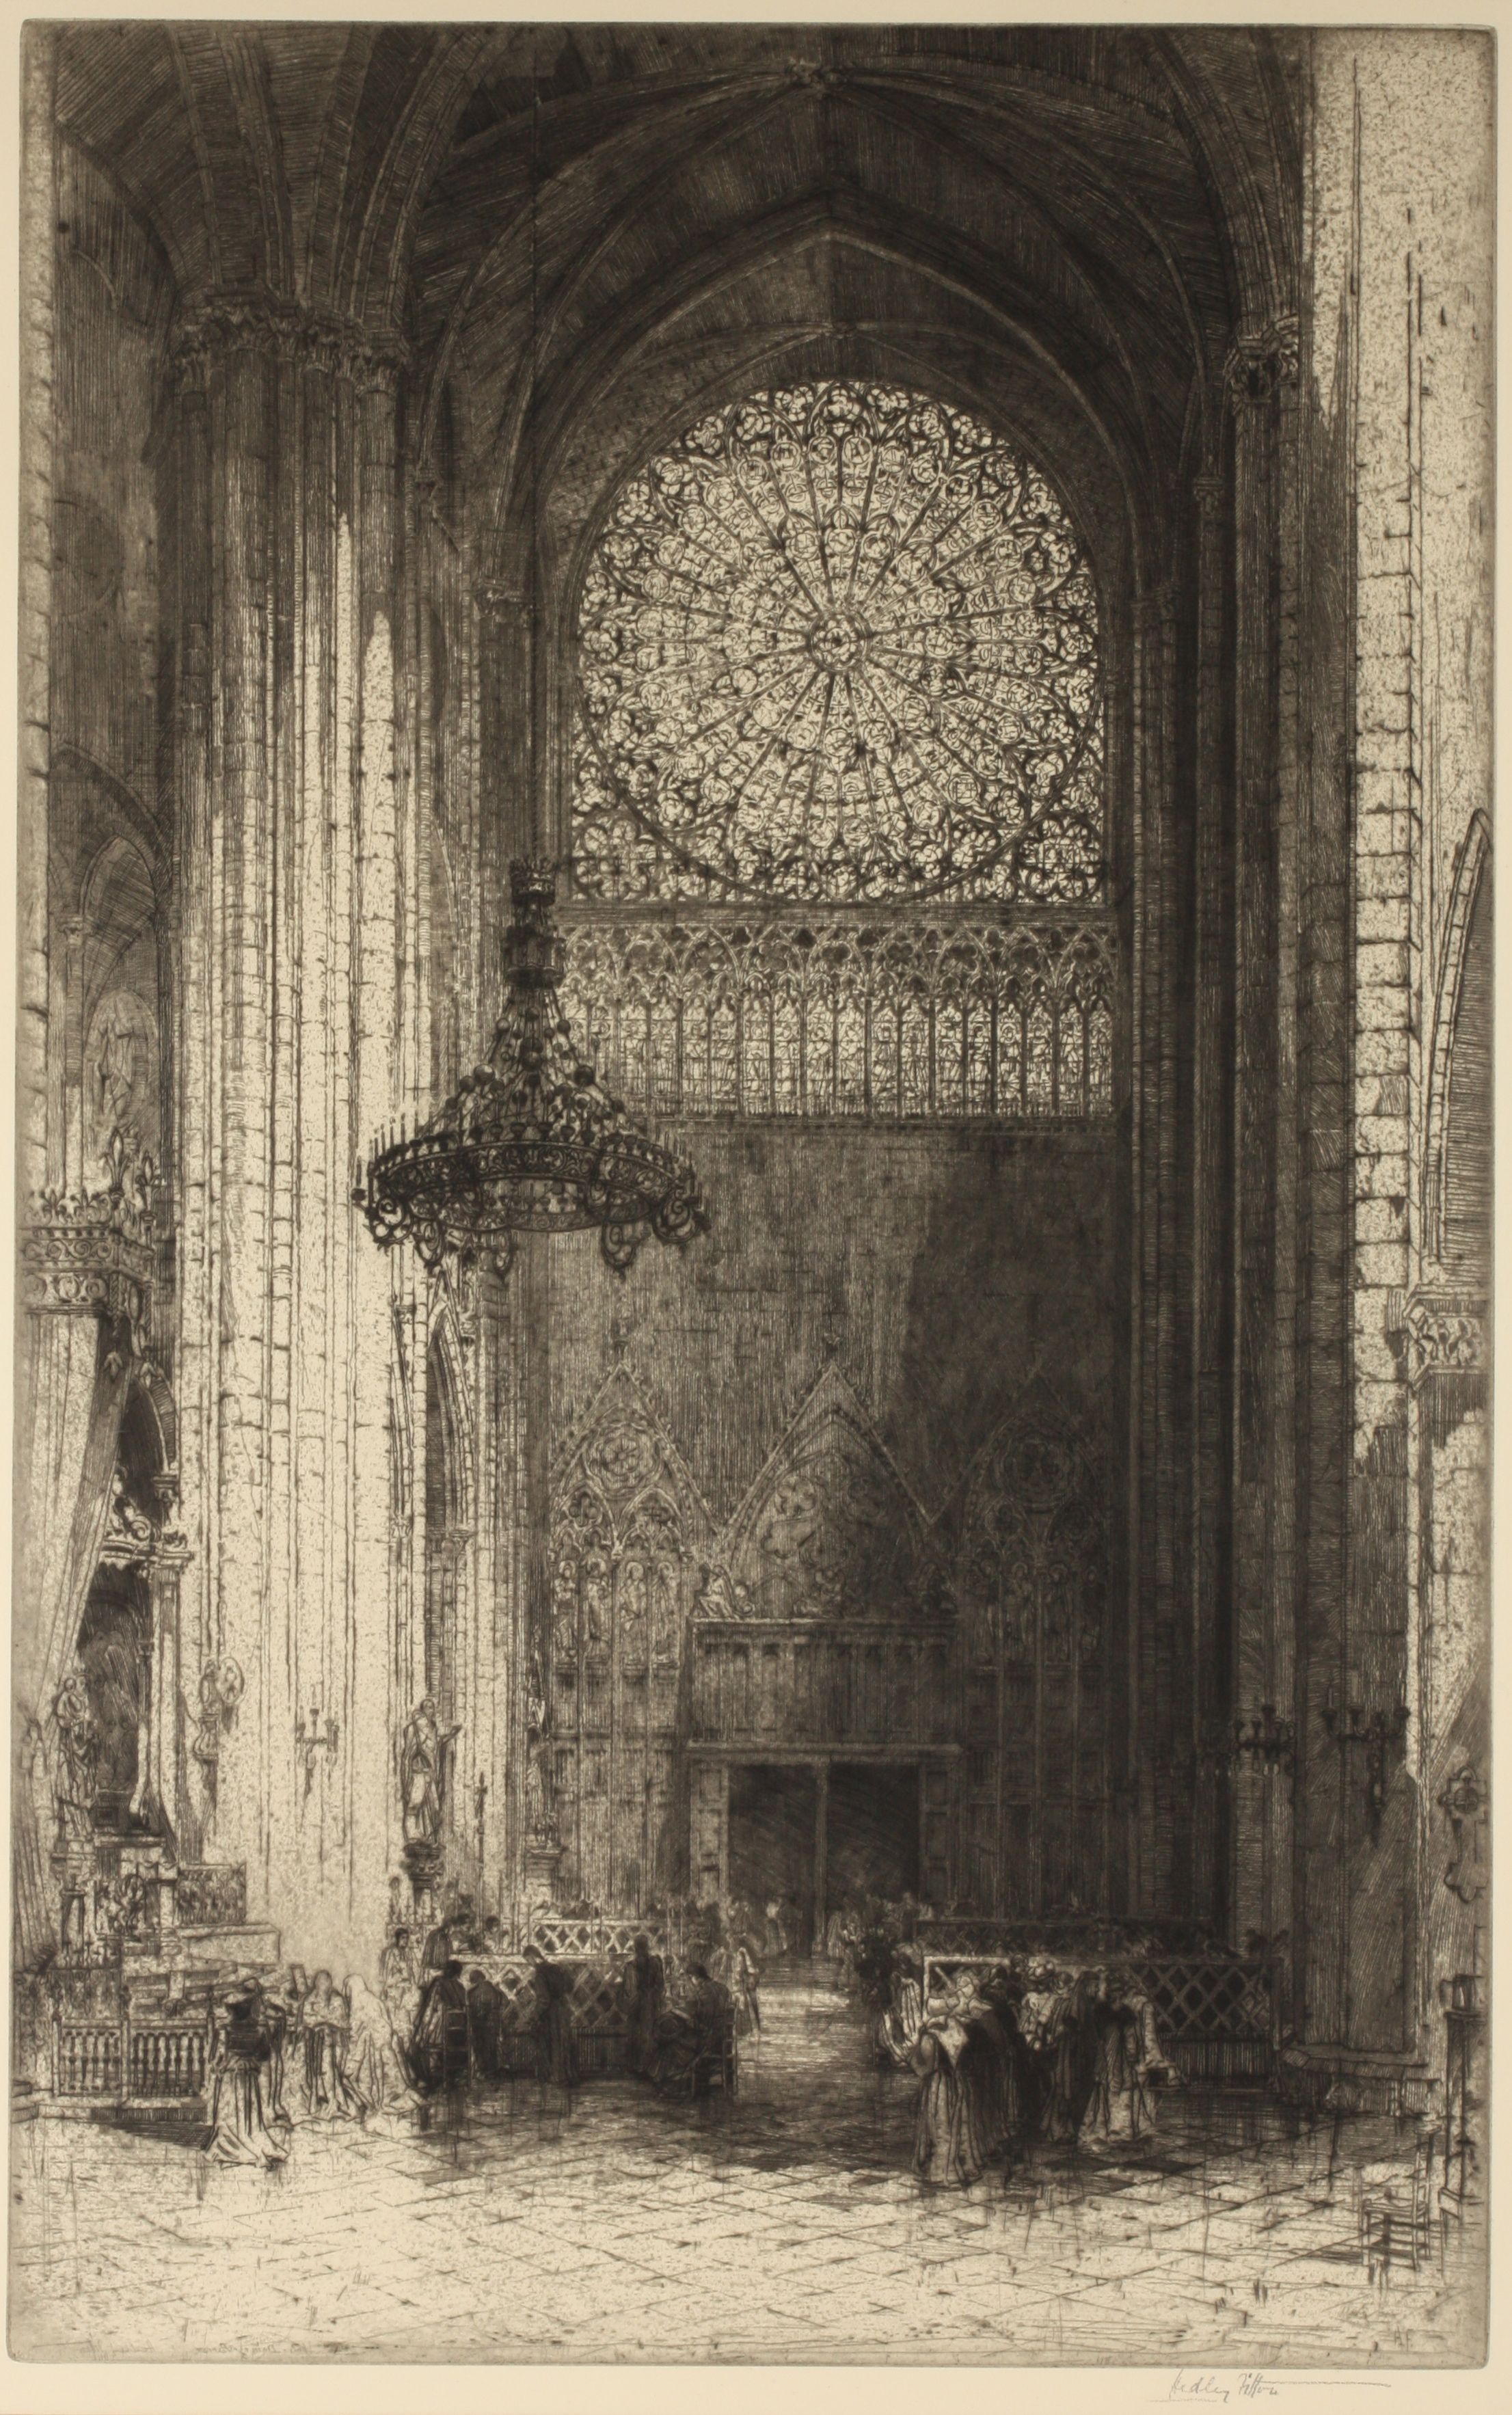 Hedley Fitton (British 1859-1929) 
'Notre Dame, Paris', a large black and white engraving of the